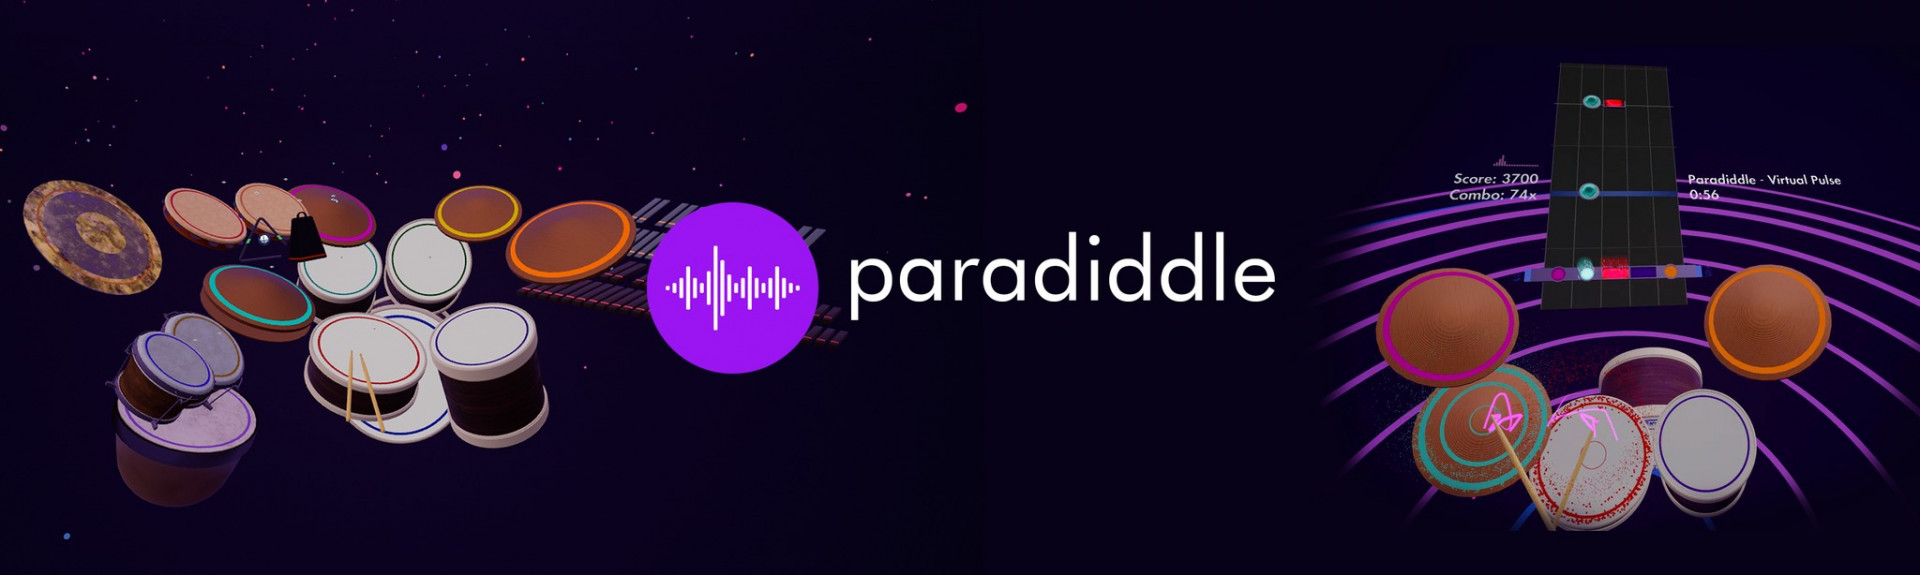 Paradiddle - Demo